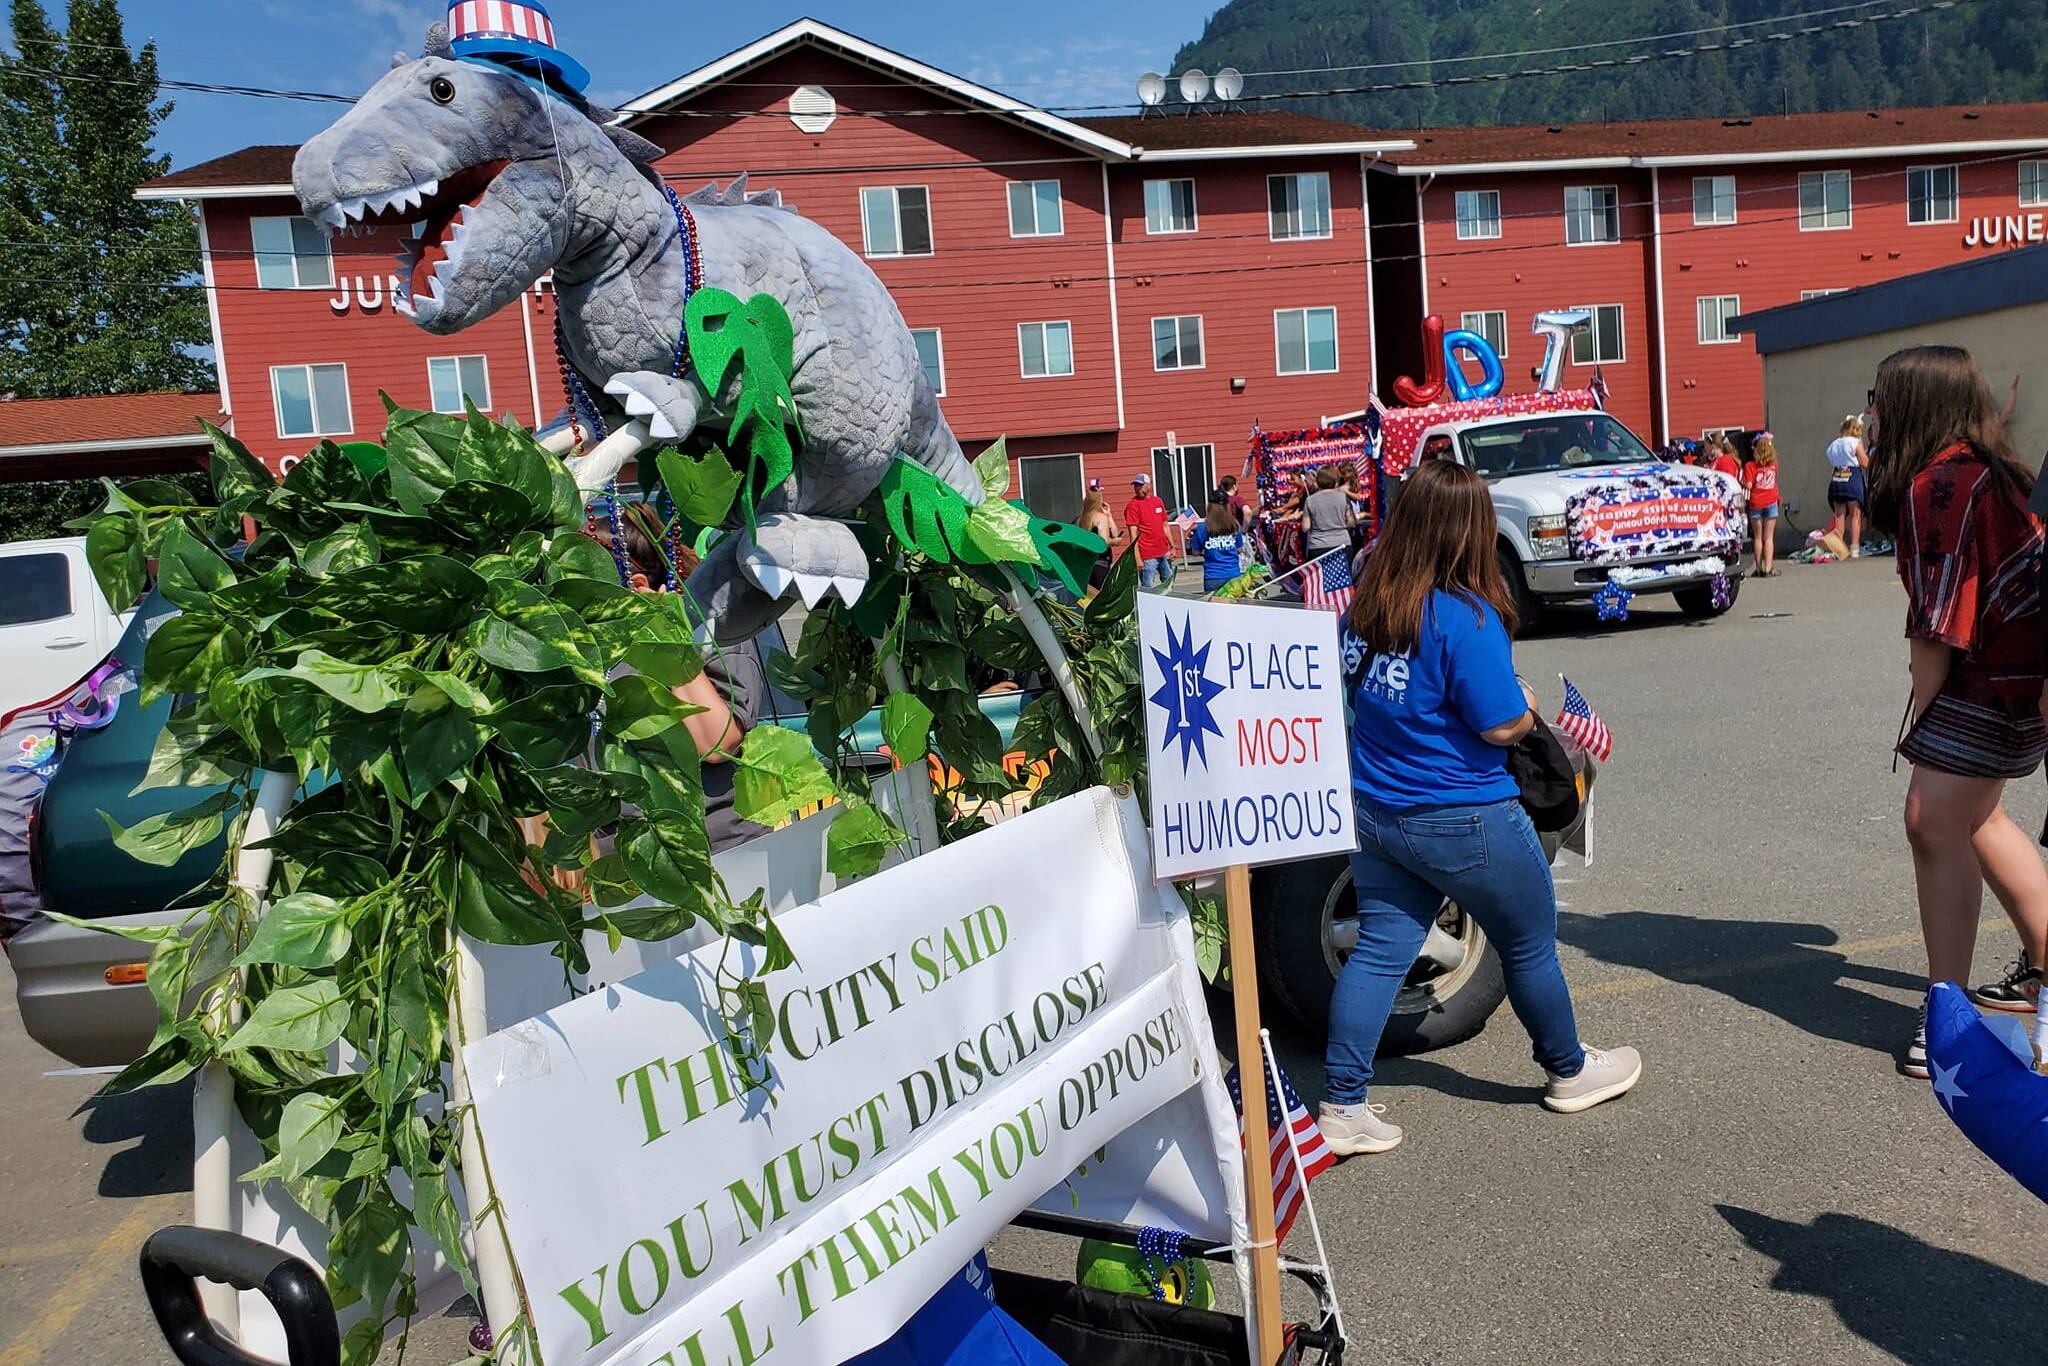 Courtesy of Protect Juneau Homeowners’ Privacy 
An Uncle Sam dinosaur adorns part of a float in Juneau’s July 4 by the group Protect Juneau Homeowner’s Privacy, which has successfully put a referendum on the Oct. 4 municipal election ballot to eliminate a requirement that property buyers publicly disclose purchase prices.